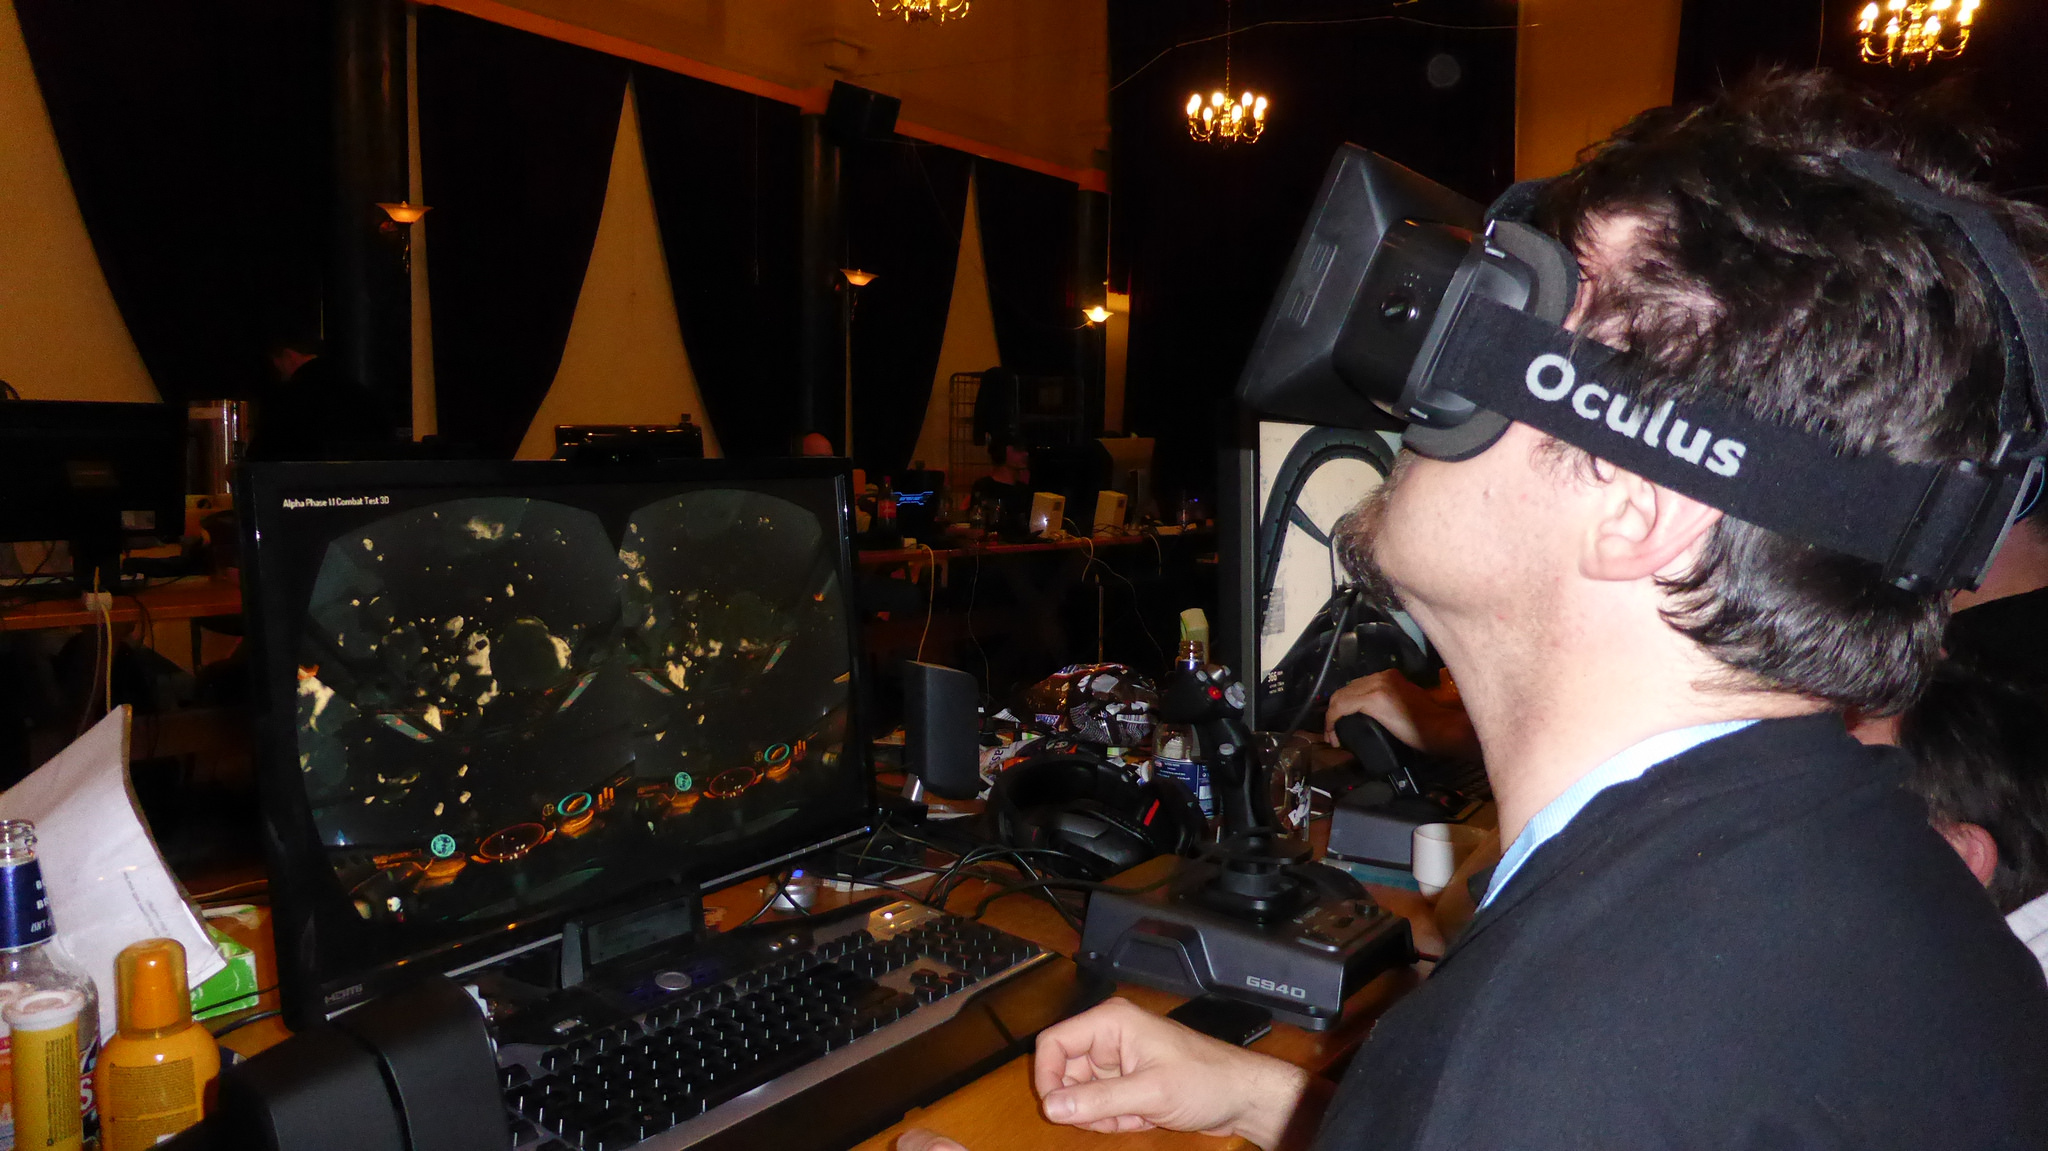 Playing Elite: Dangerous with the Oculus Rift.